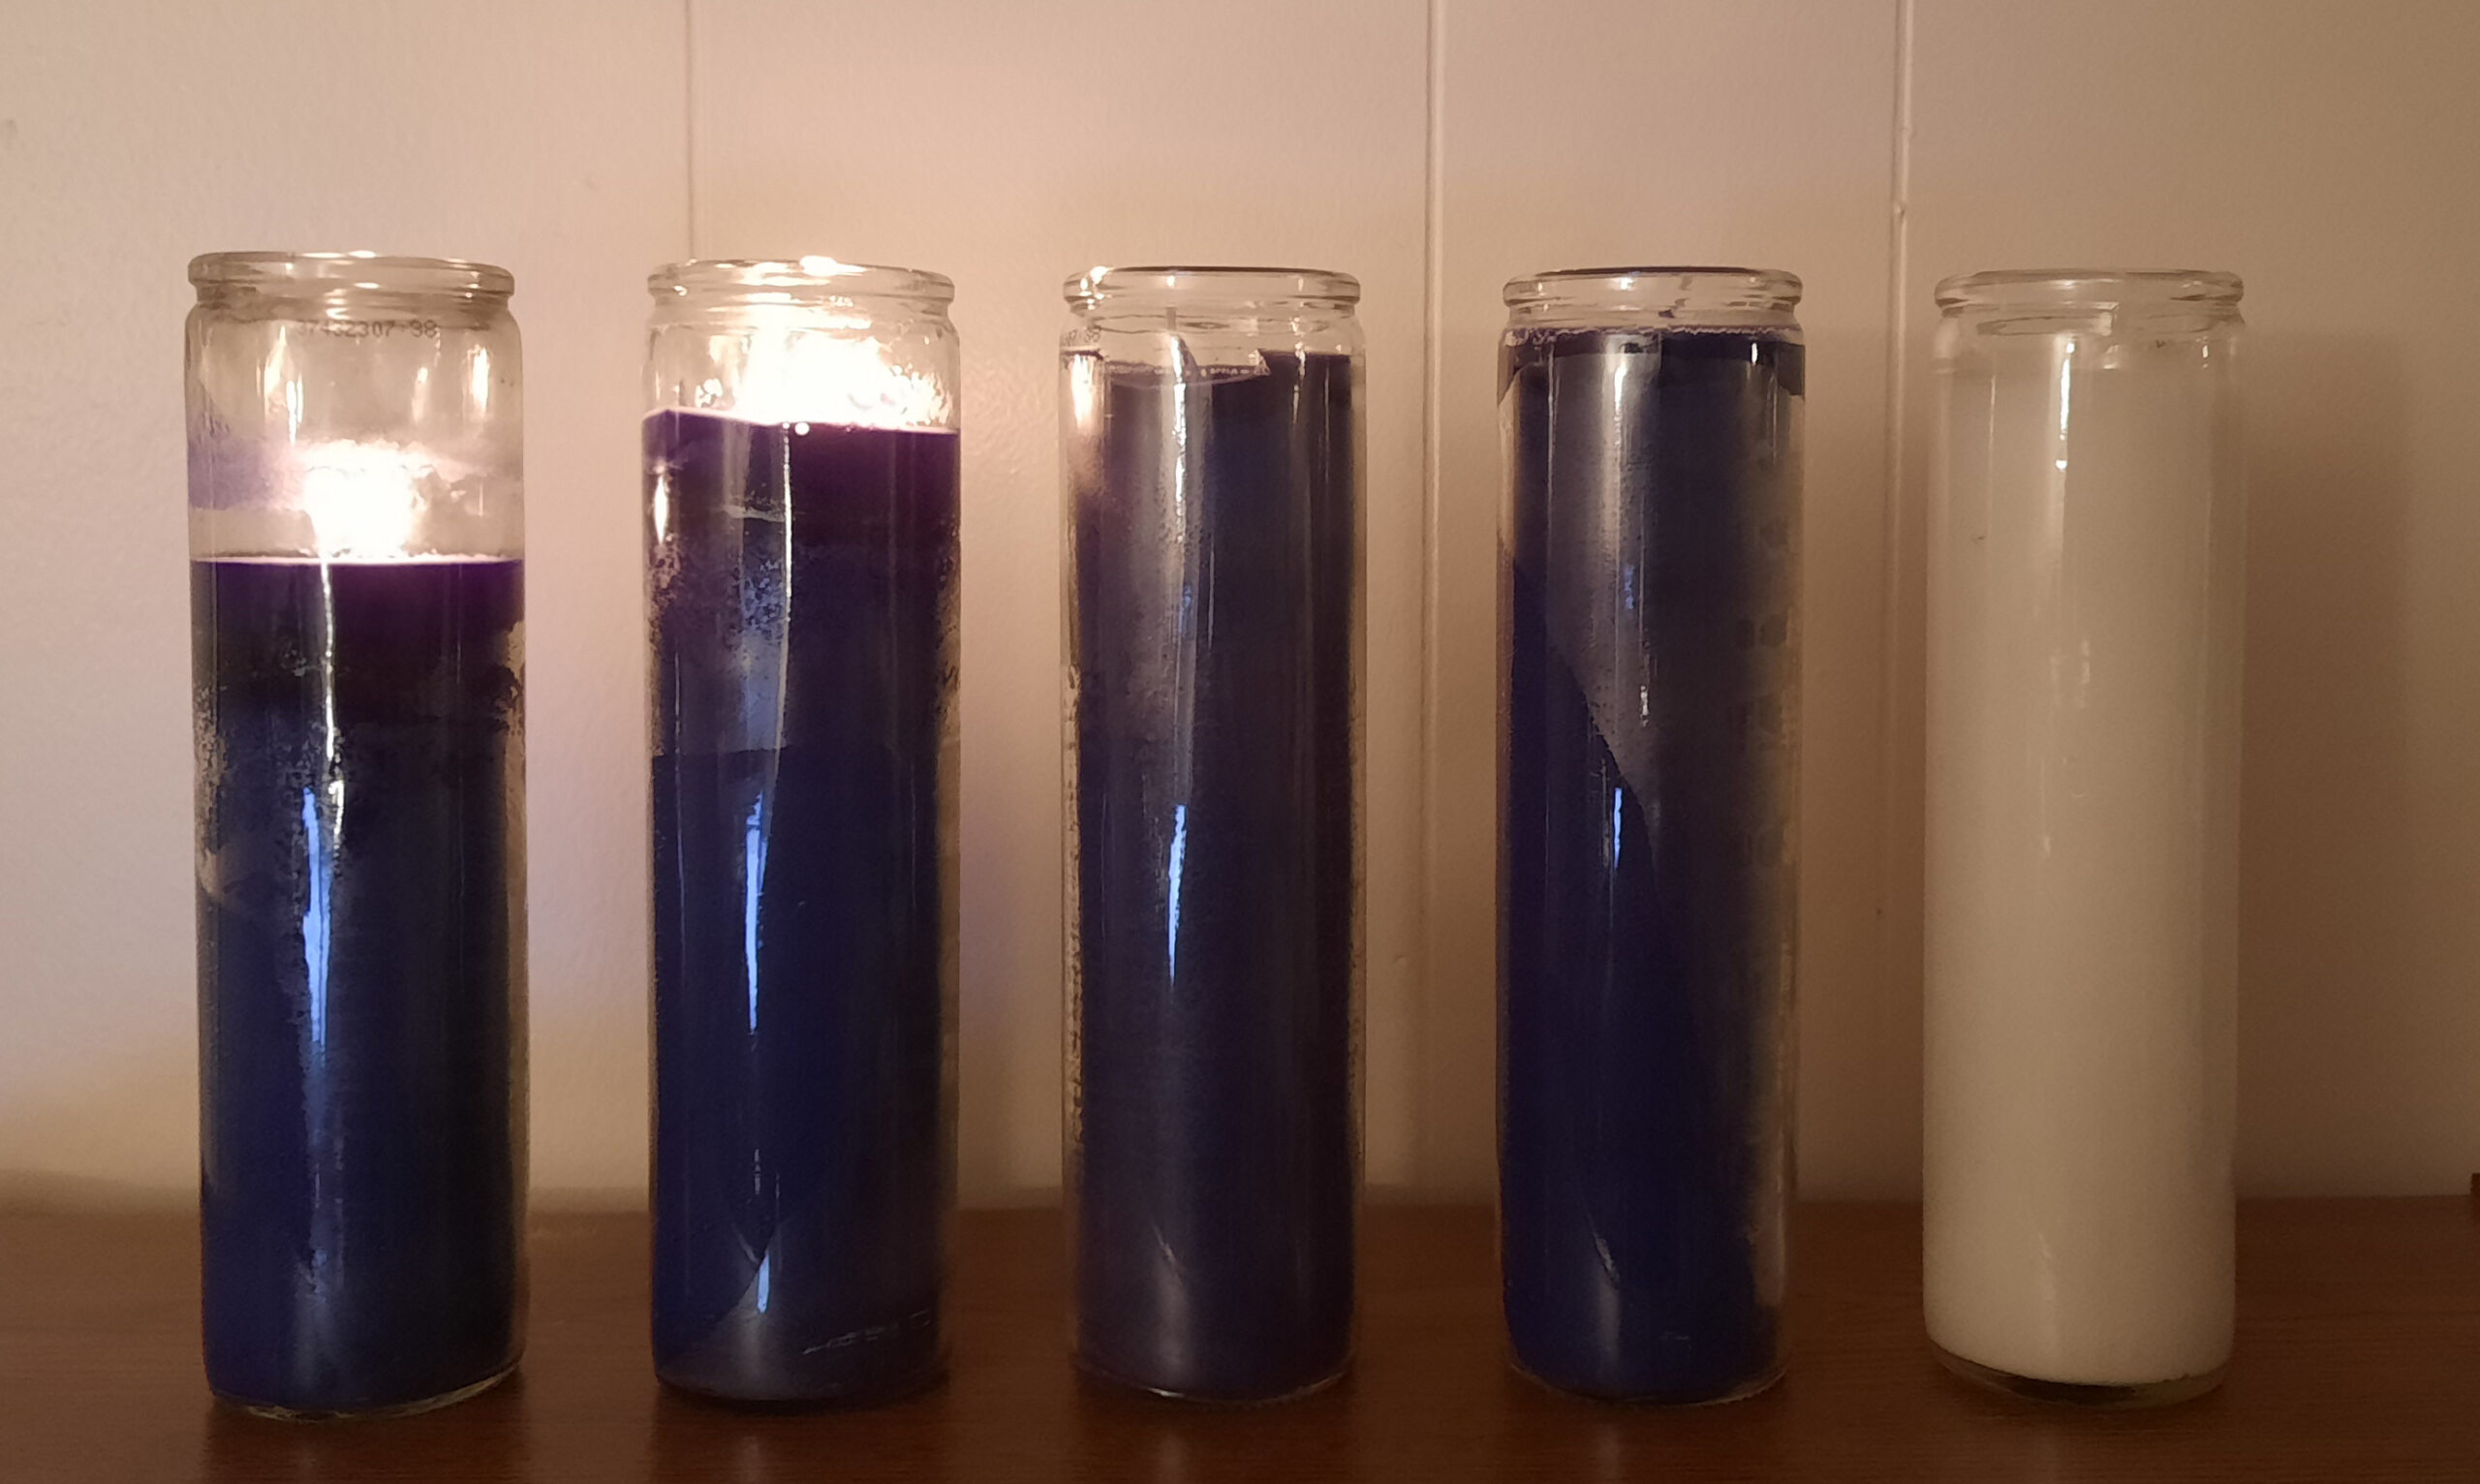 Four purple devotional candles and a white devotional candle. Two of the purple candles are lit.